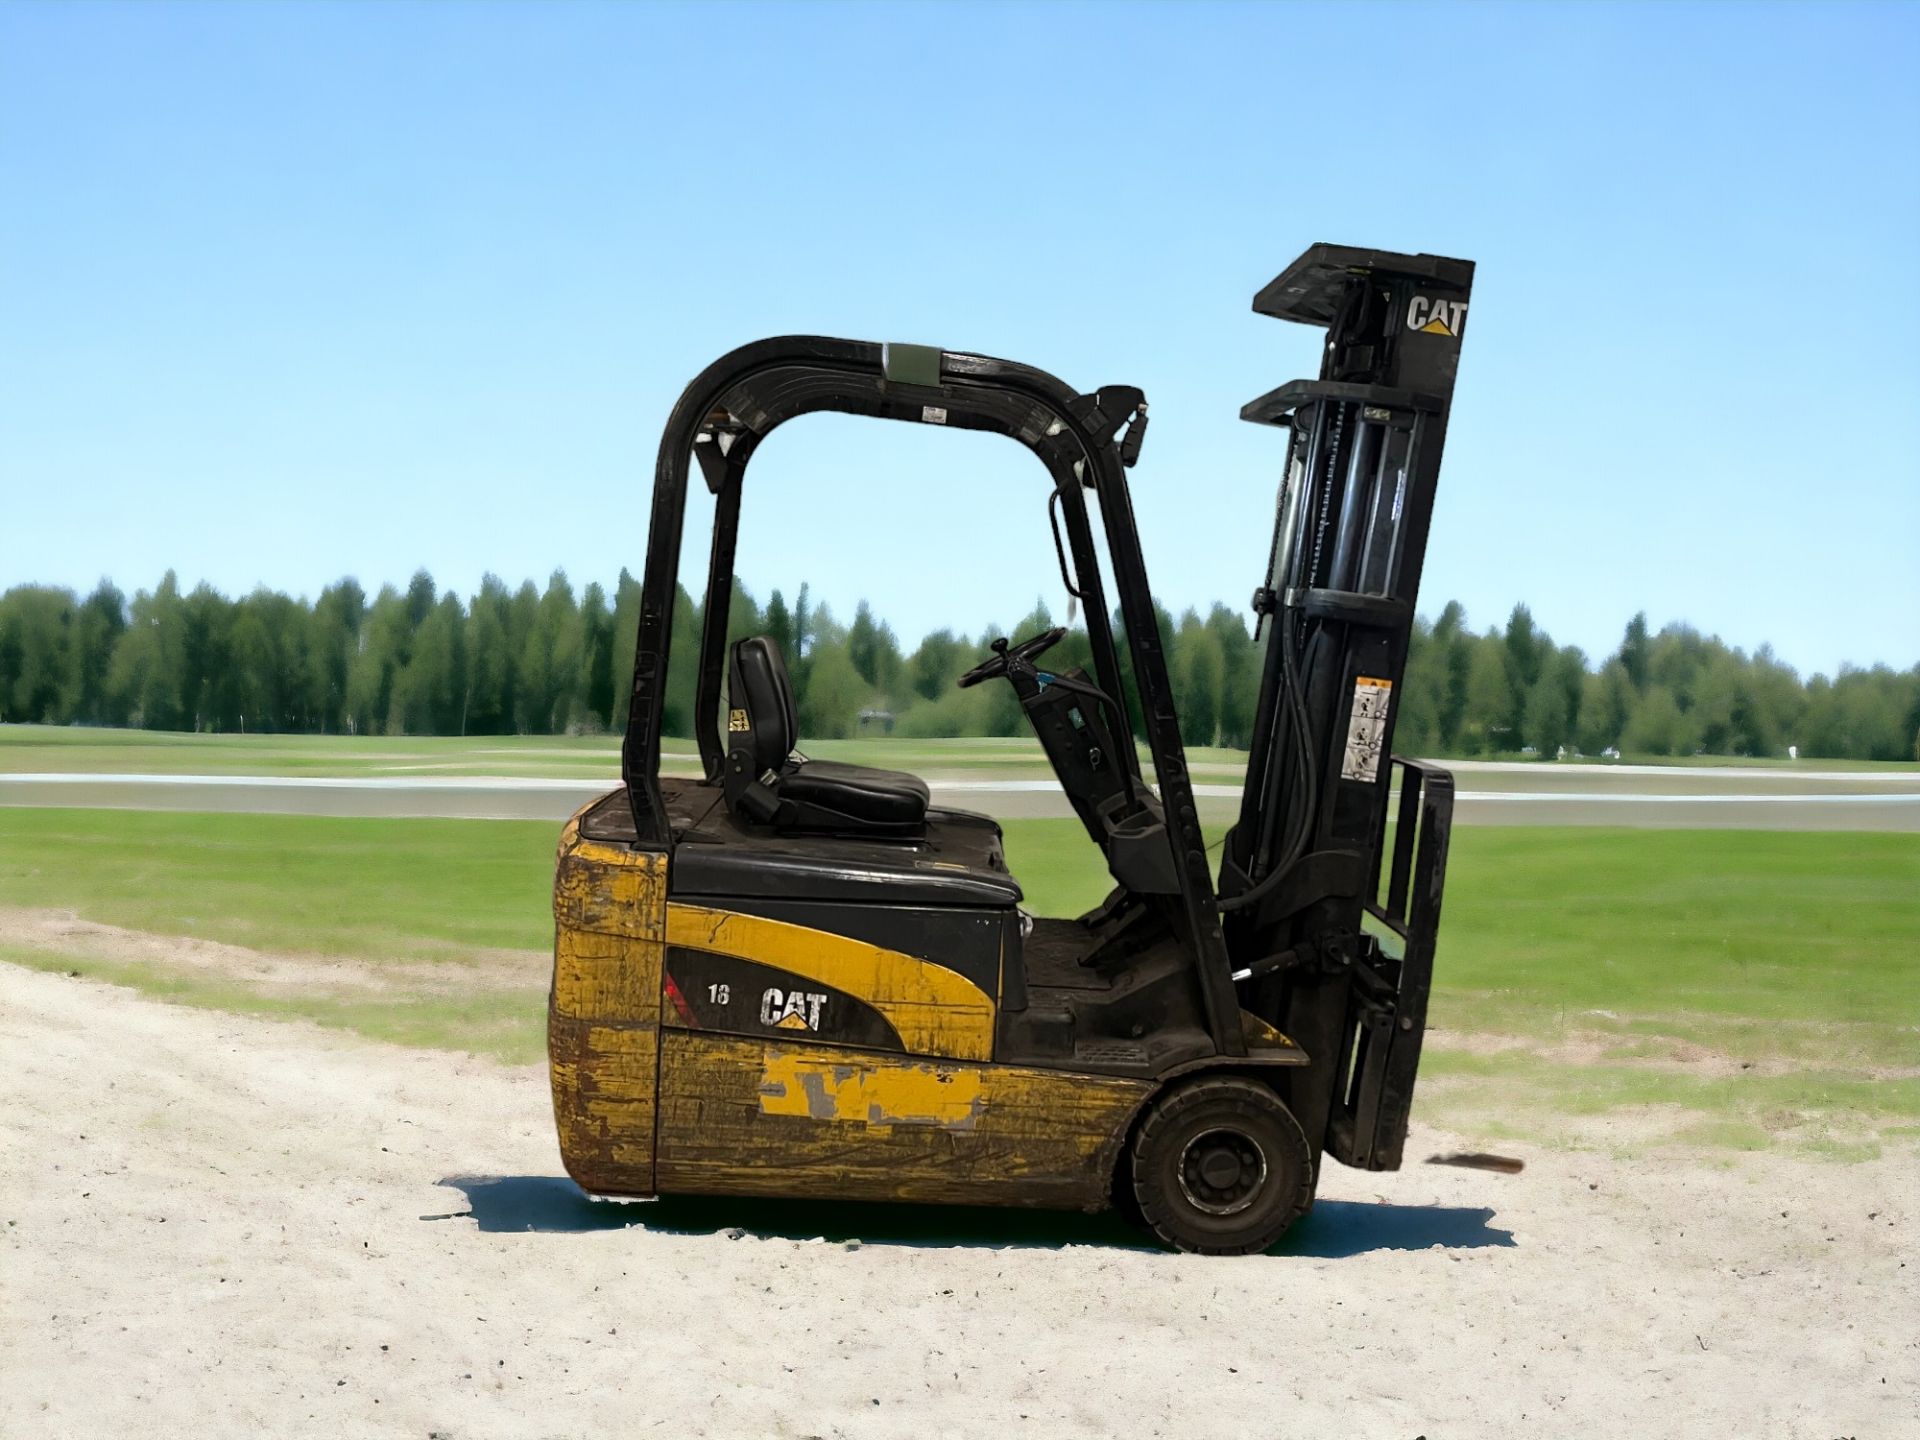 CAT LIFT TRUCKS ELECTRIC 3-WHEEL FORKLIFT - EP18NT (2007) **(INCLUDES CHARGER)** - Image 5 of 6